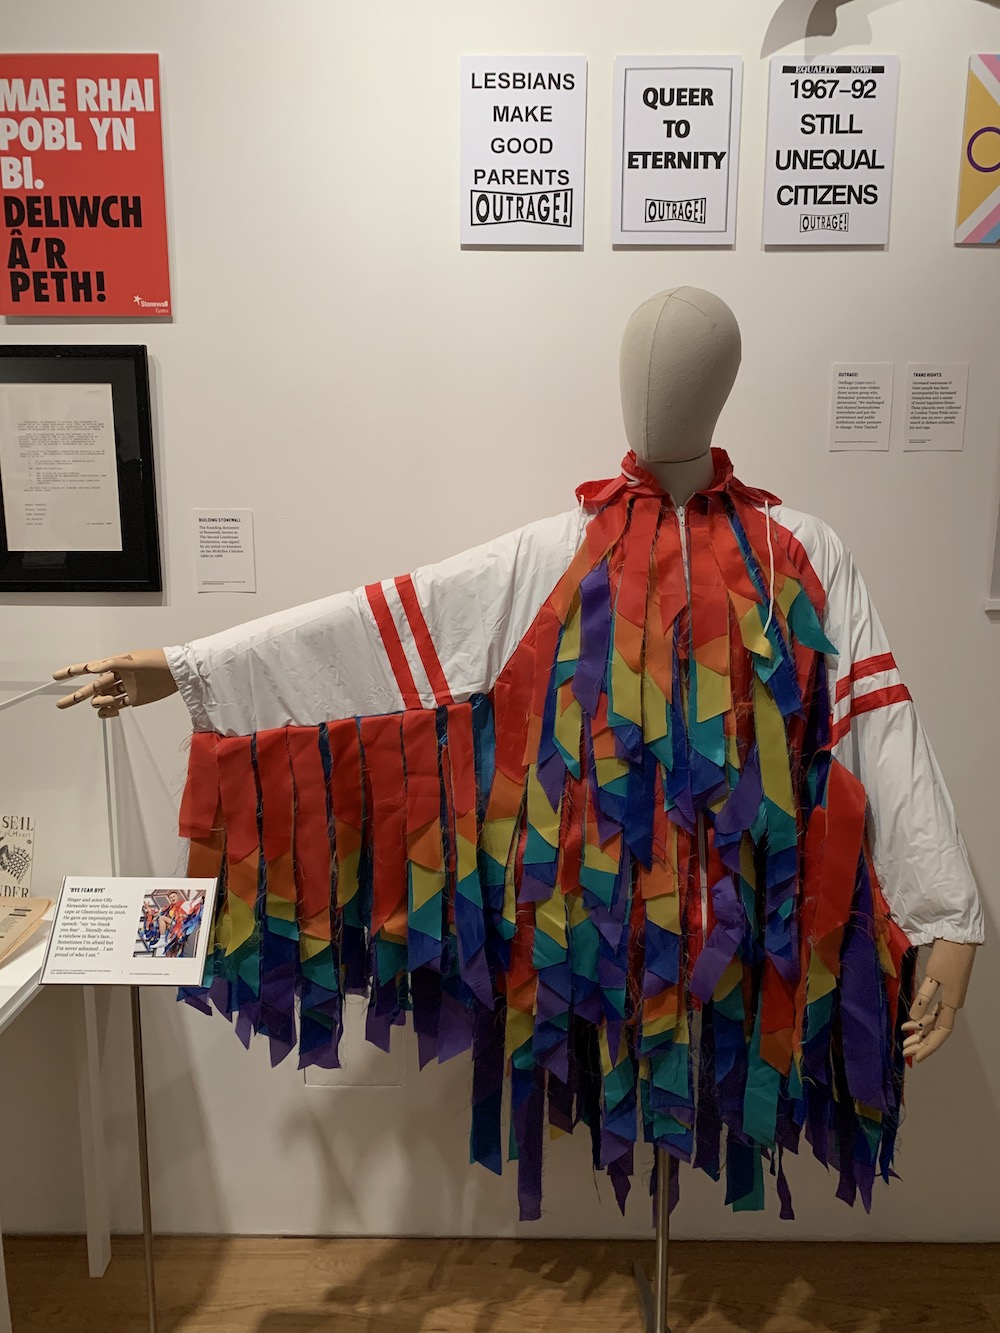 Rainbow cape worn by singer Olly Alexander. Photo Credit: © Ric Morris.